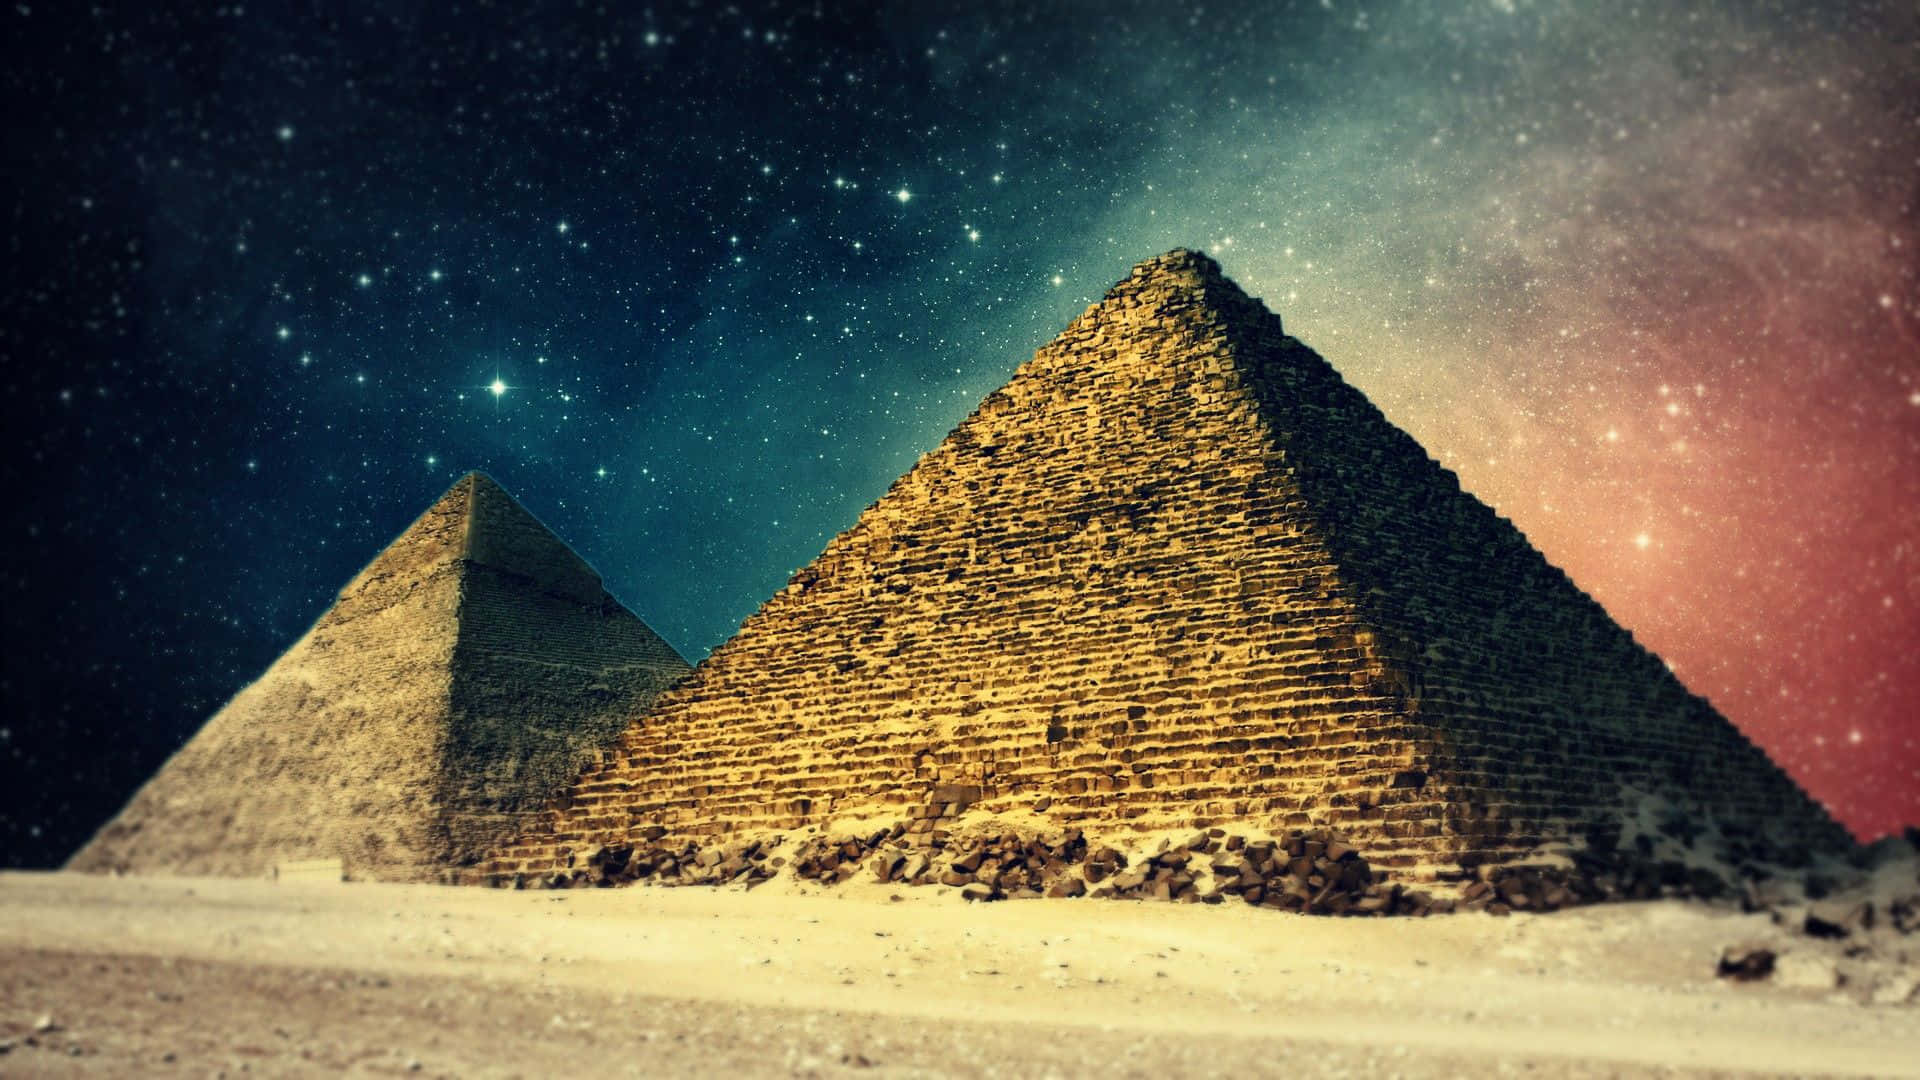 Three Pyramids In The Desert With Stars In The Sky Background